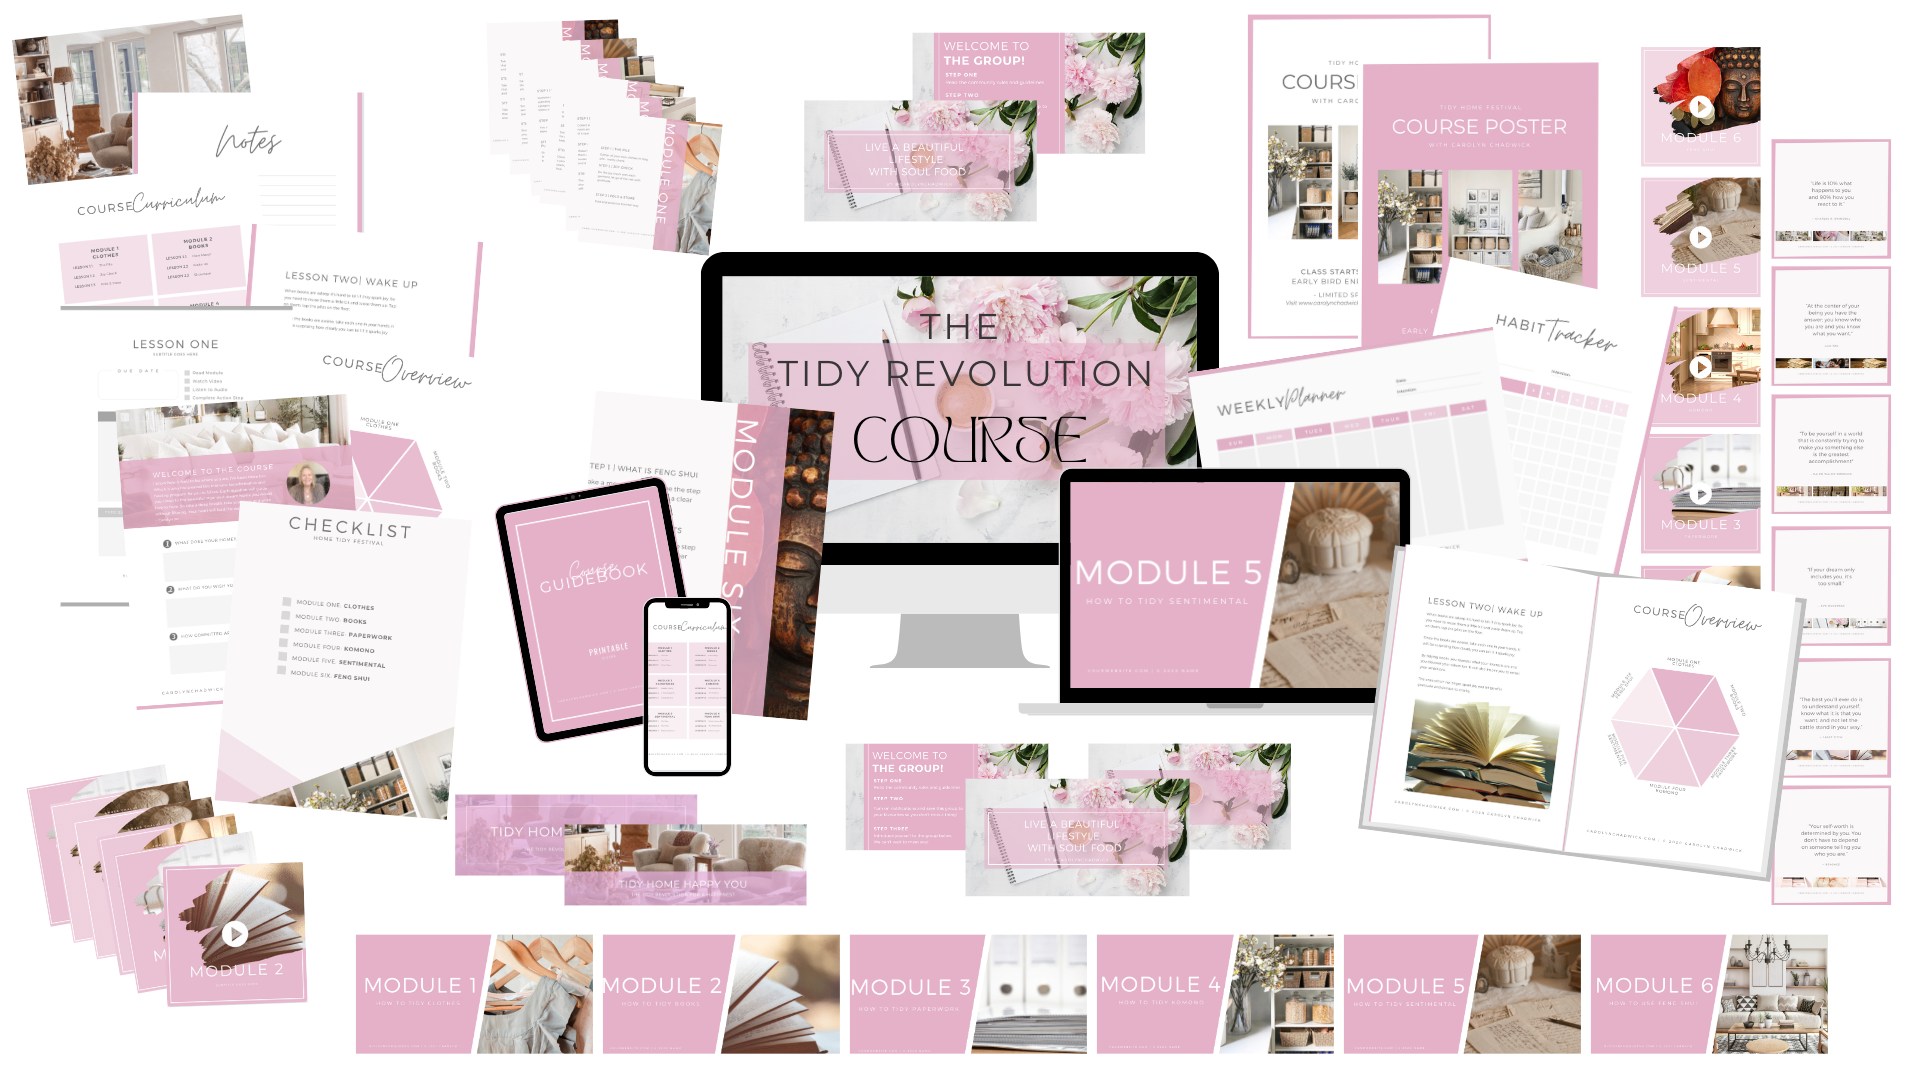 The Tidy Revolution online course promo